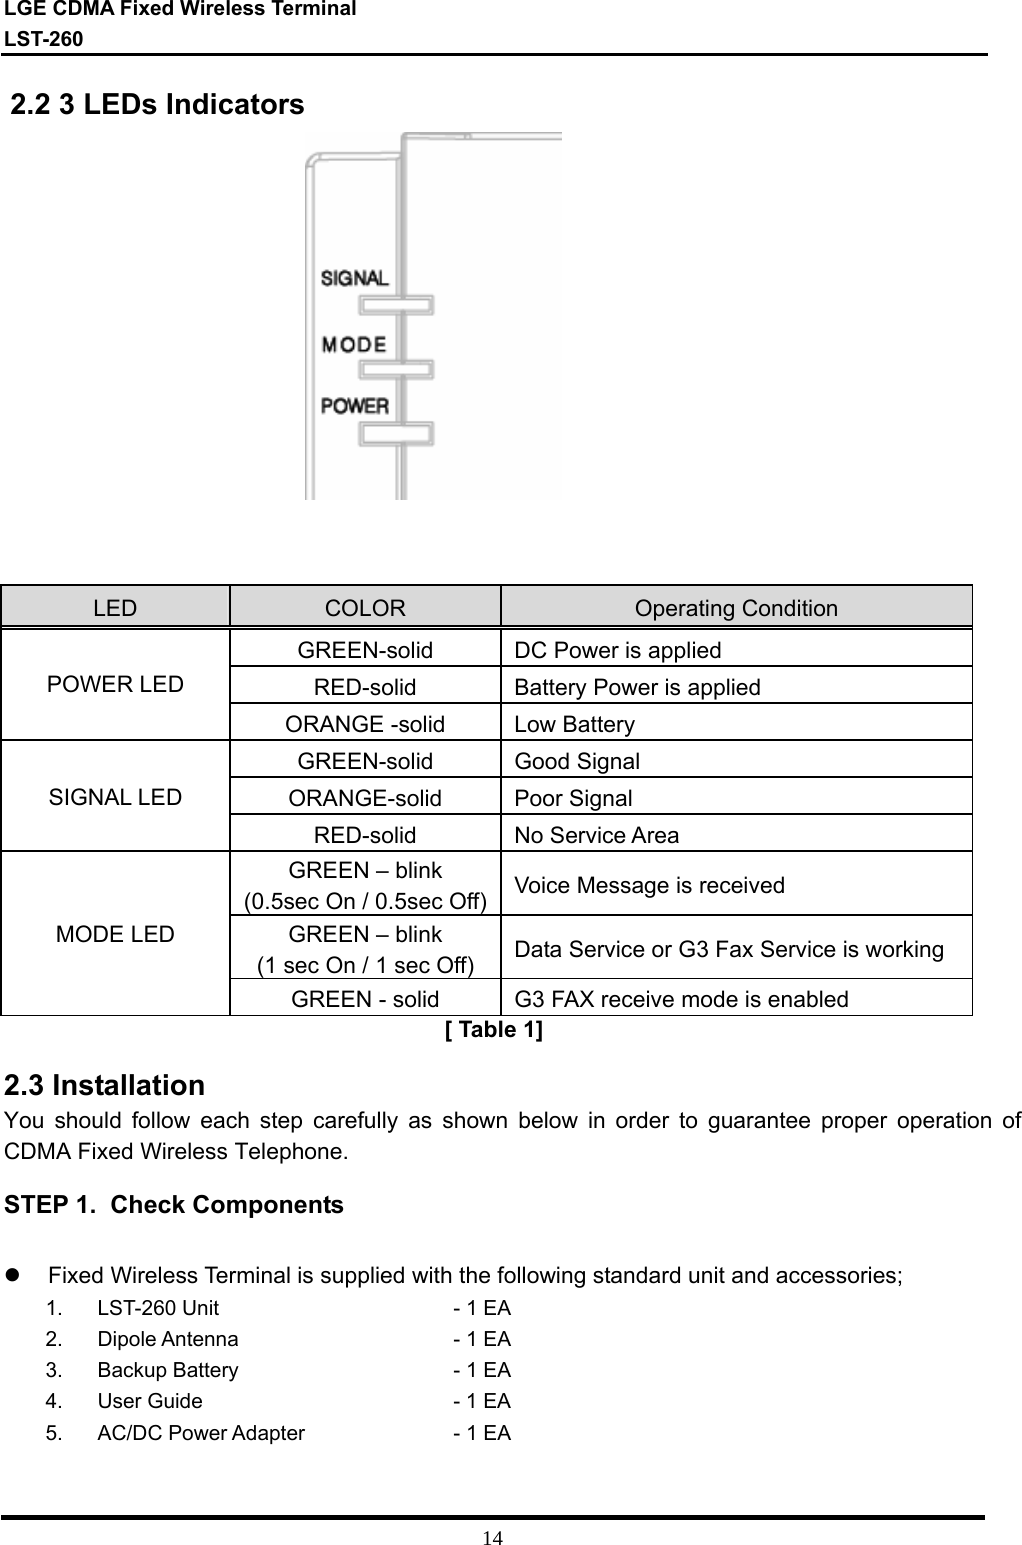 LGE CDMA Fixed Wireless Terminal LST-260         14  2.2 3 LEDs Indicators                 [ Table 1]  2.3 Installation You should follow each step carefully as shown below in order to guarantee proper operation of CDMA Fixed Wireless Telephone. STEP 1.  Check Components  z  Fixed Wireless Terminal is supplied with the following standard unit and accessories; 1.  LST-260 Unit                        - 1 EA 2.  Dipole Antenna            - 1 EA 3.  Backup Battery              - 1 EA 4.  User Guide              - 1 EA 5.  AC/DC Power Adapter            - 1 EA  LED  COLOR  Operating Condition GREEN-solid  DC Power is applied RED-solid  Battery Power is applied POWER LED ORANGE -solid  Low Battery  GREEN-solid  Good Signal  ORANGE-solid  Poor Signal  SIGNAL LED RED-solid  No Service Area  GREEN – blink (0.5sec On / 0.5sec Off) Voice Message is received  GREEN – blink (1 sec On / 1 sec Off)  Data Service or G3 Fax Service is working MODE LED GREEN - solid  G3 FAX receive mode is enabled 